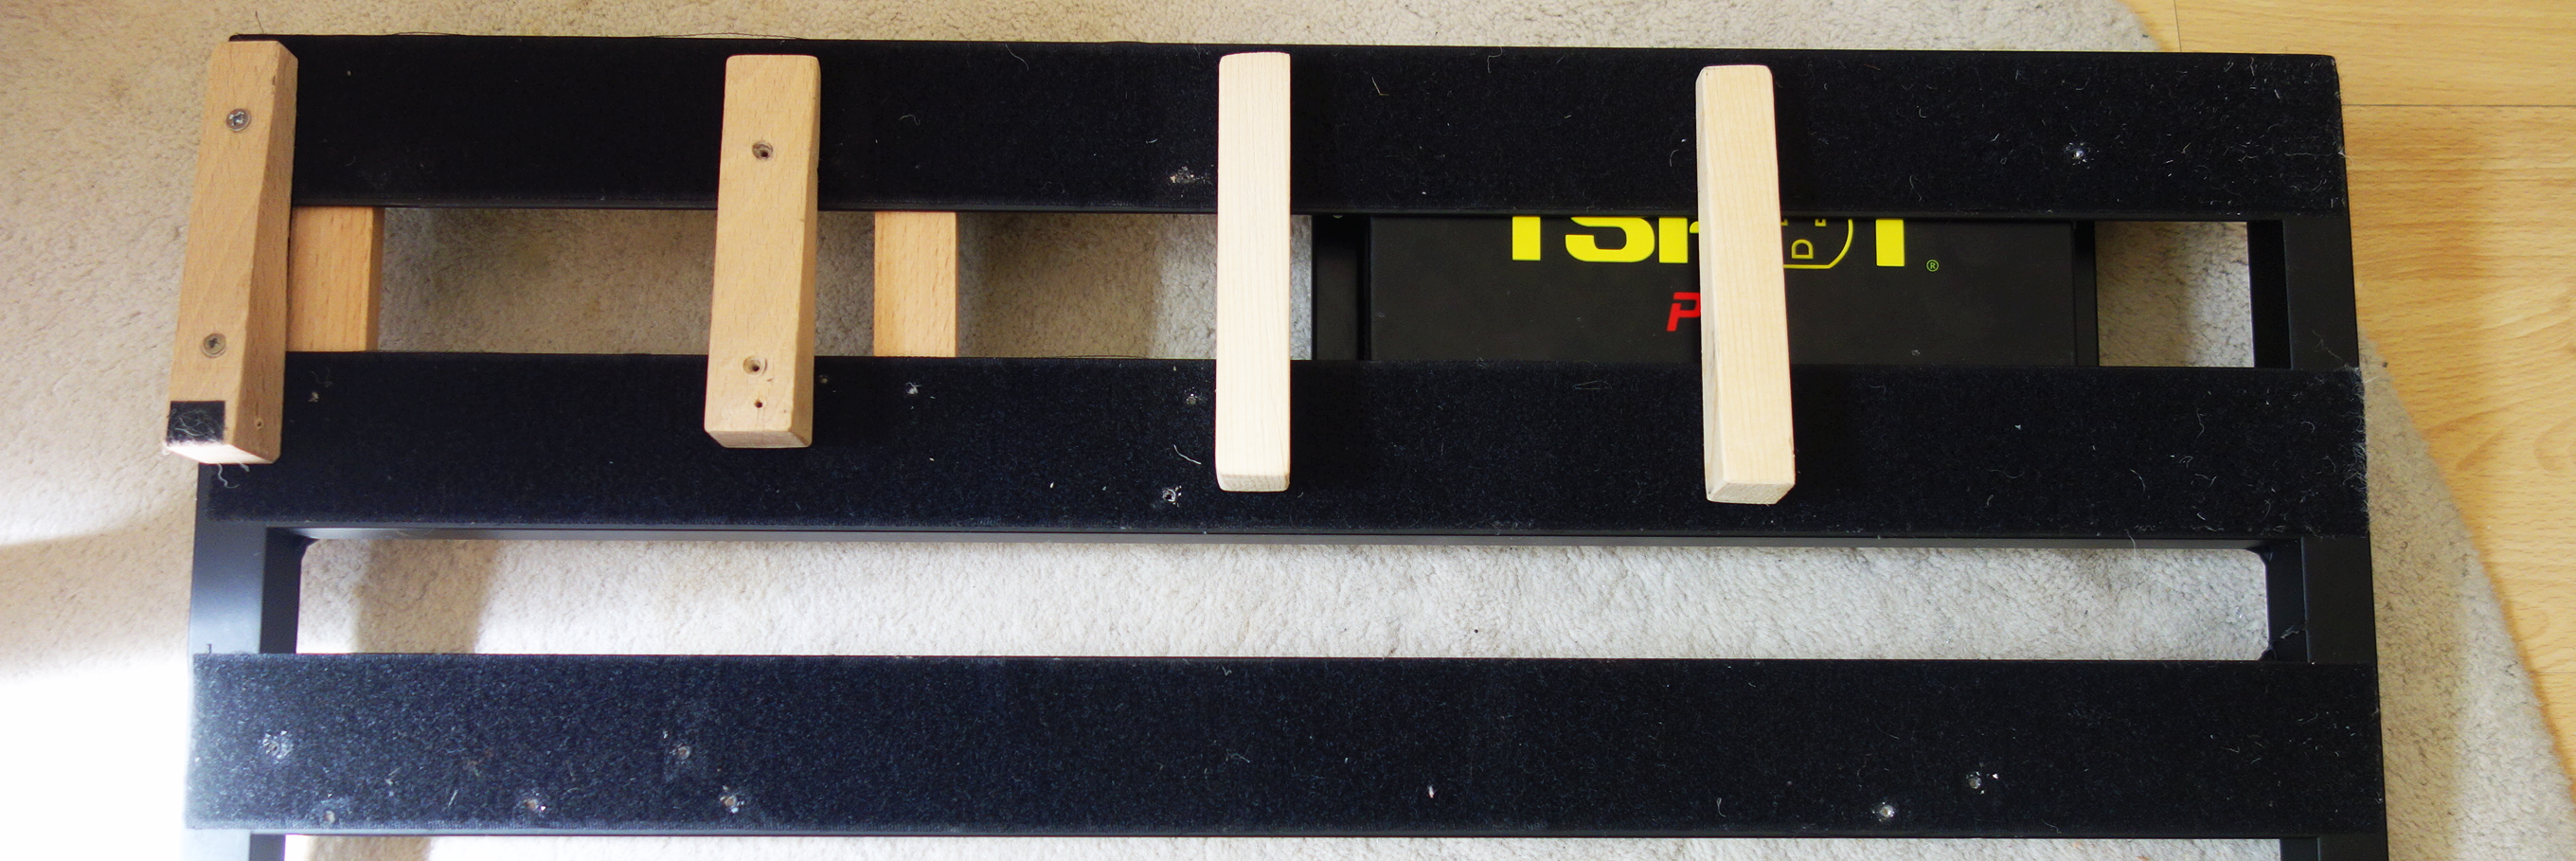 Pedal board under construction